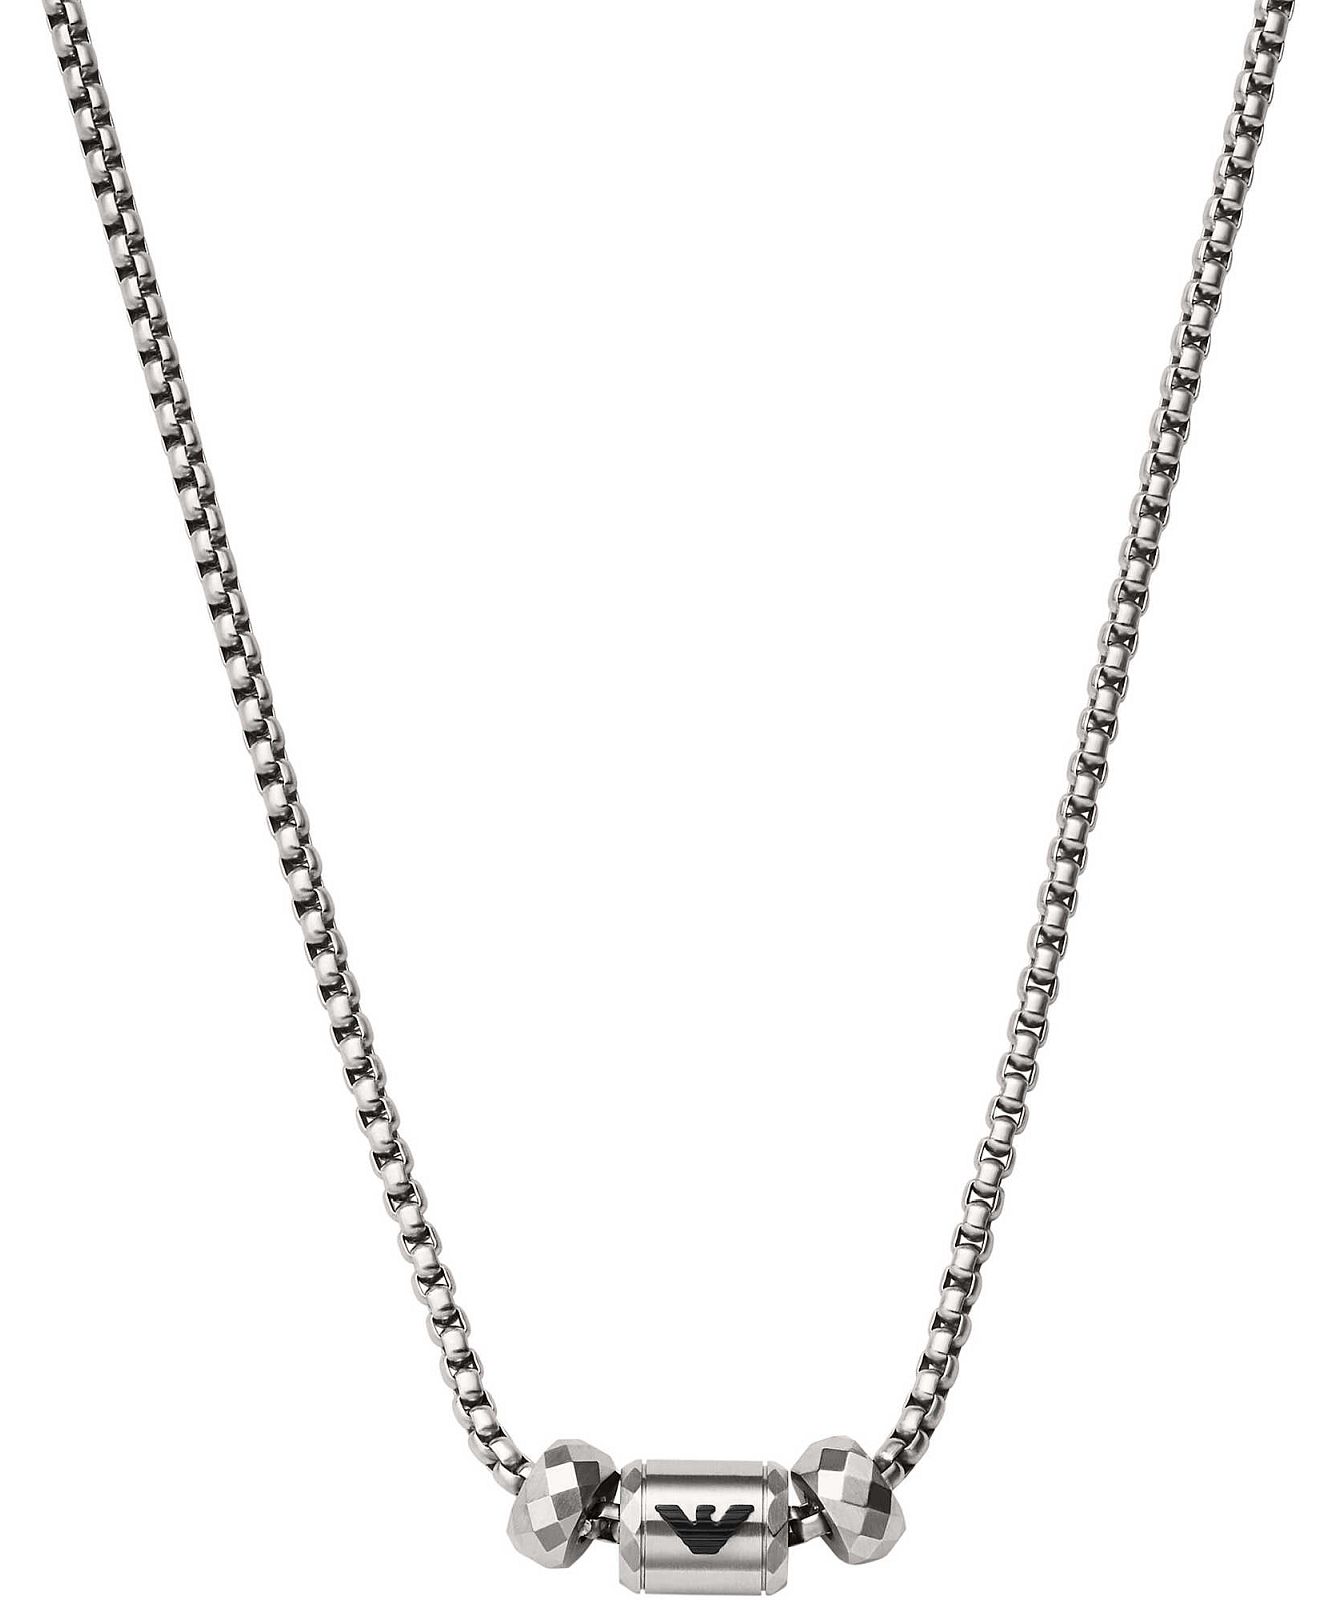 Emporio Armani Men's Stainless Steel Necklace - EGS1542040 - Watch Station